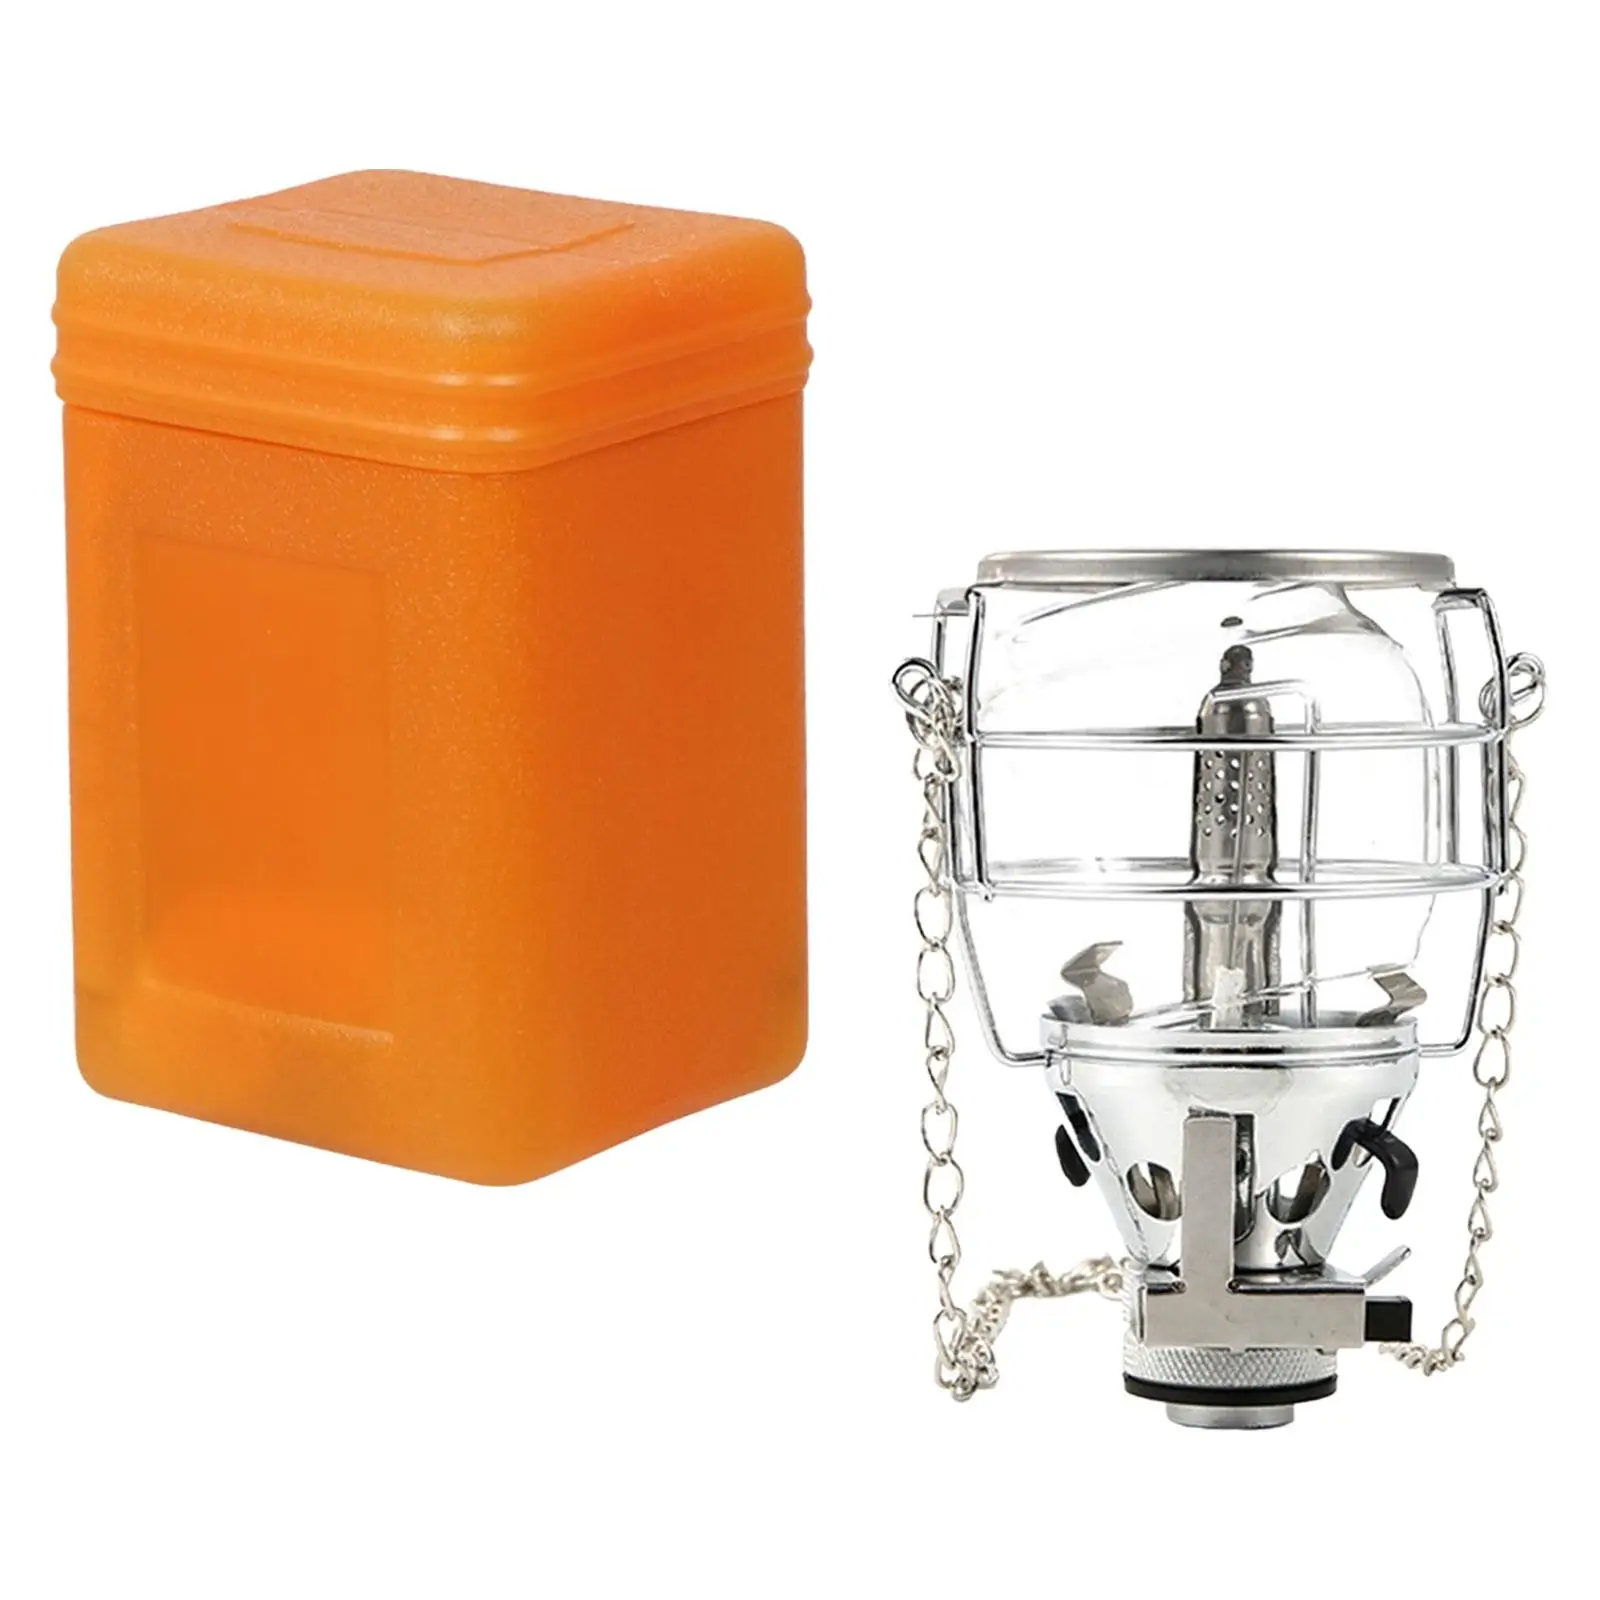 Compact Gas Lantern Fuel Lamp Lighting Gear with Storage Case Adjustable Hanging